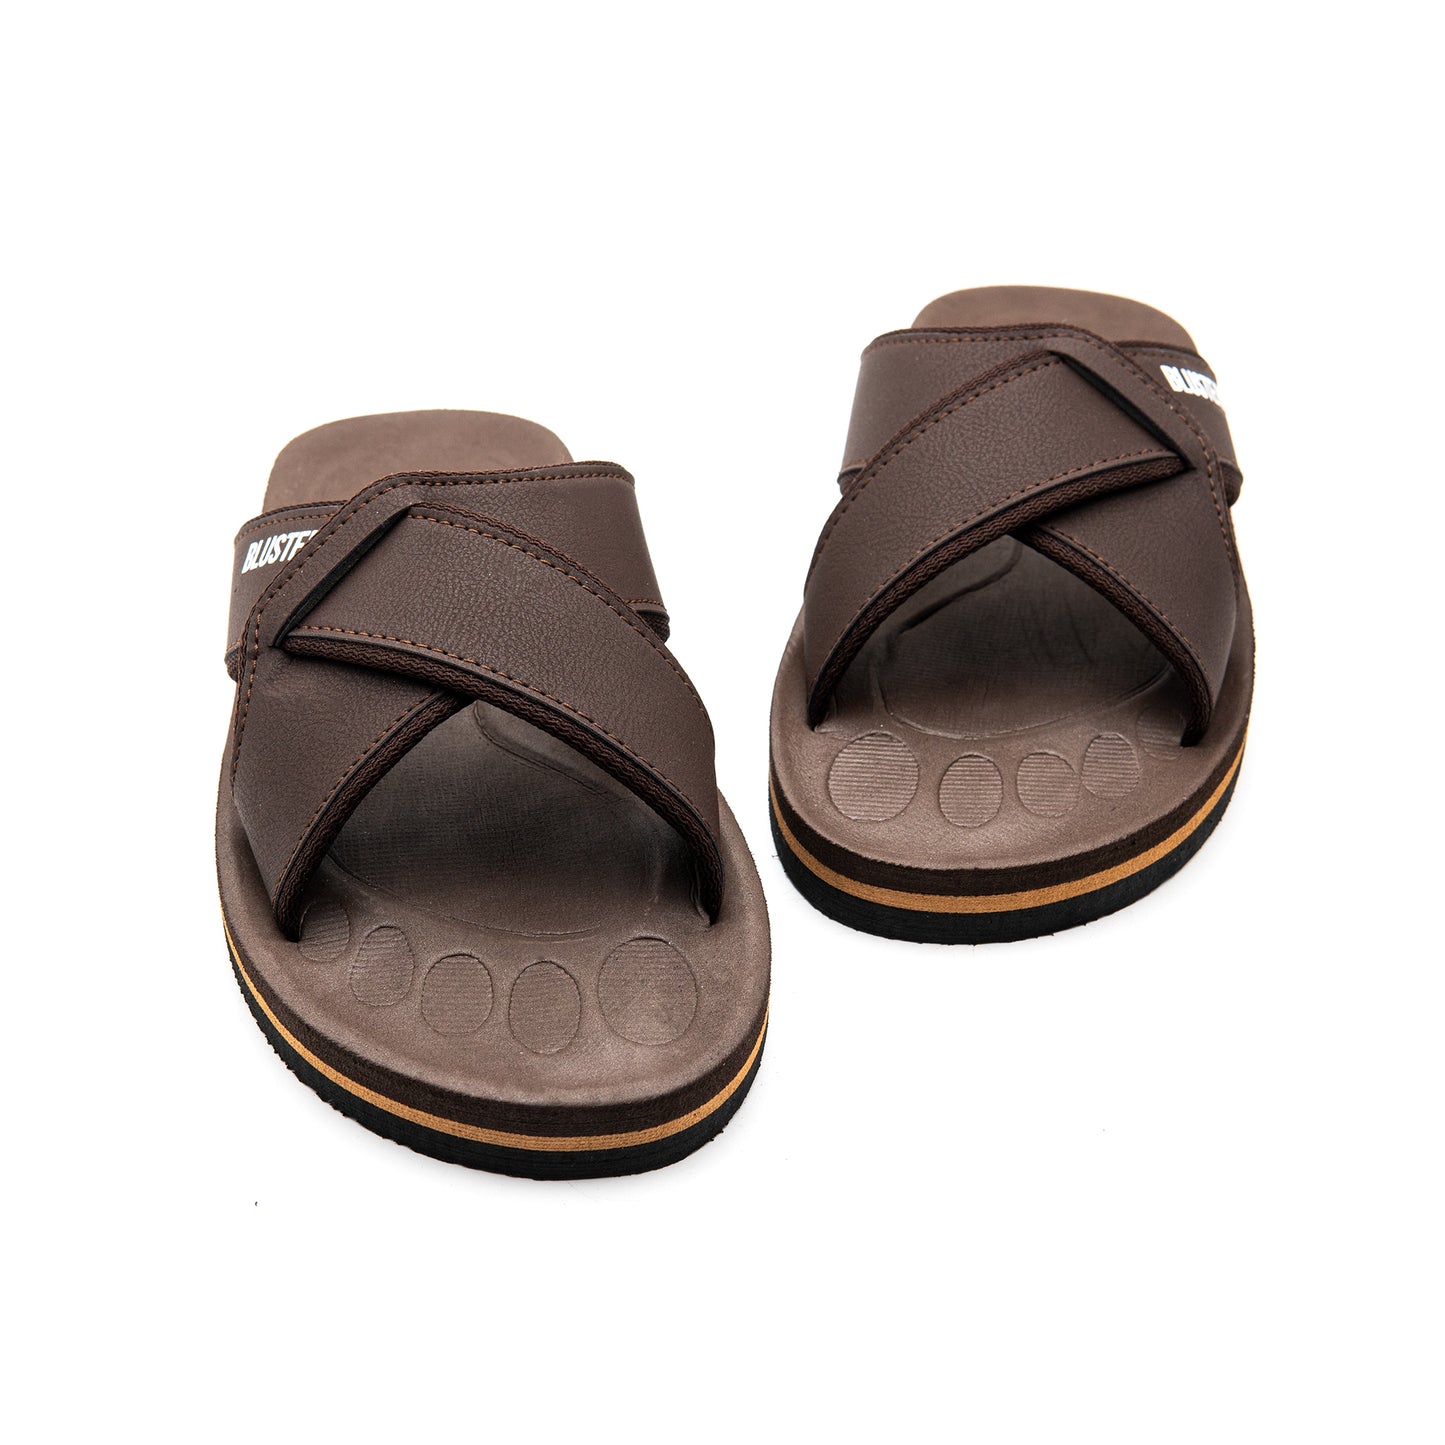 Brown Styled Comfy Slippers